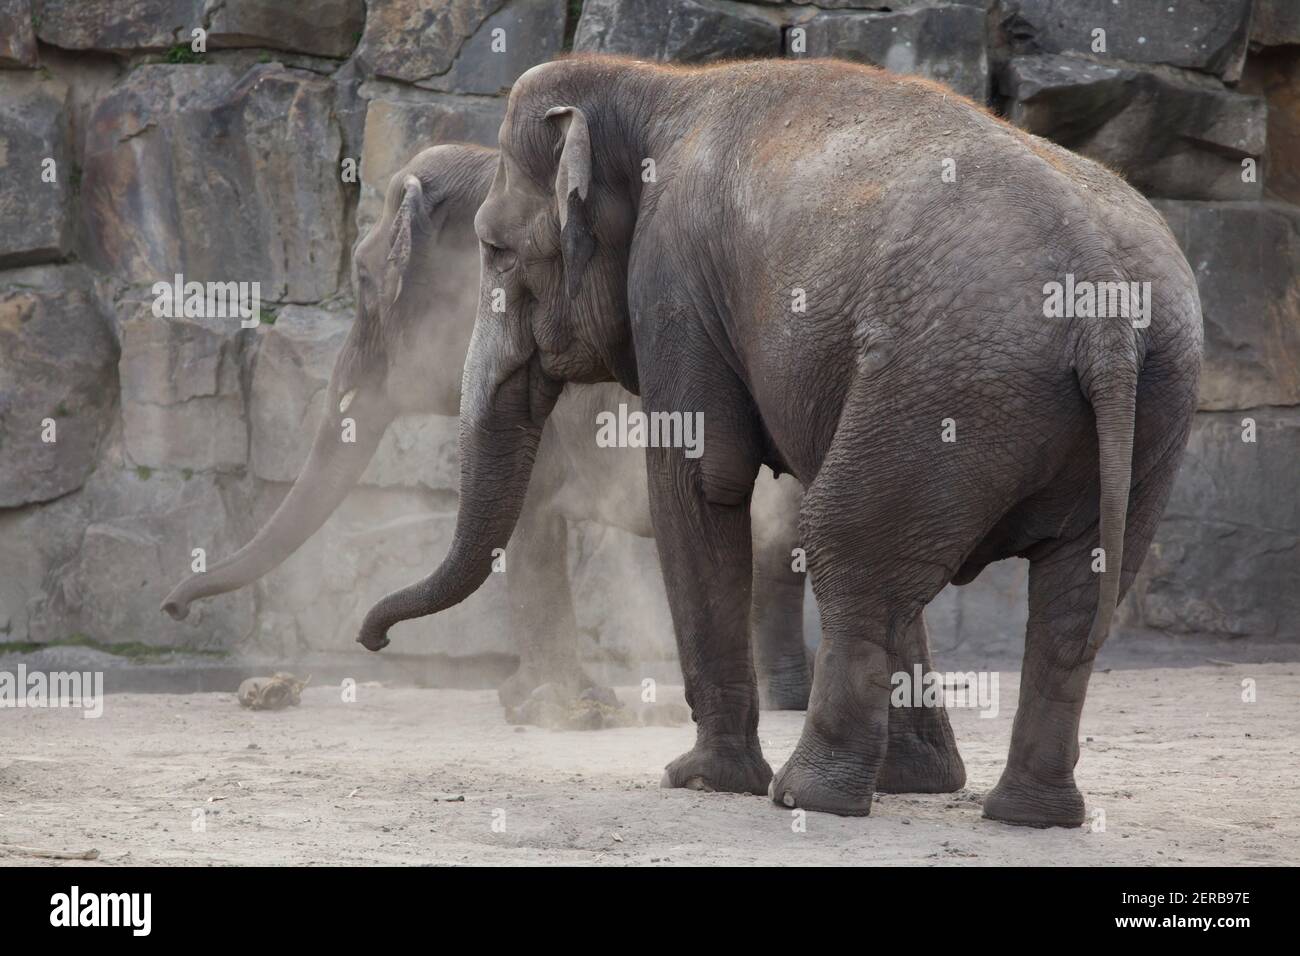 Indian elephant (Elephas maximus indicus) at Tierpark Berlin in Berlin, Germany. Stock Photo